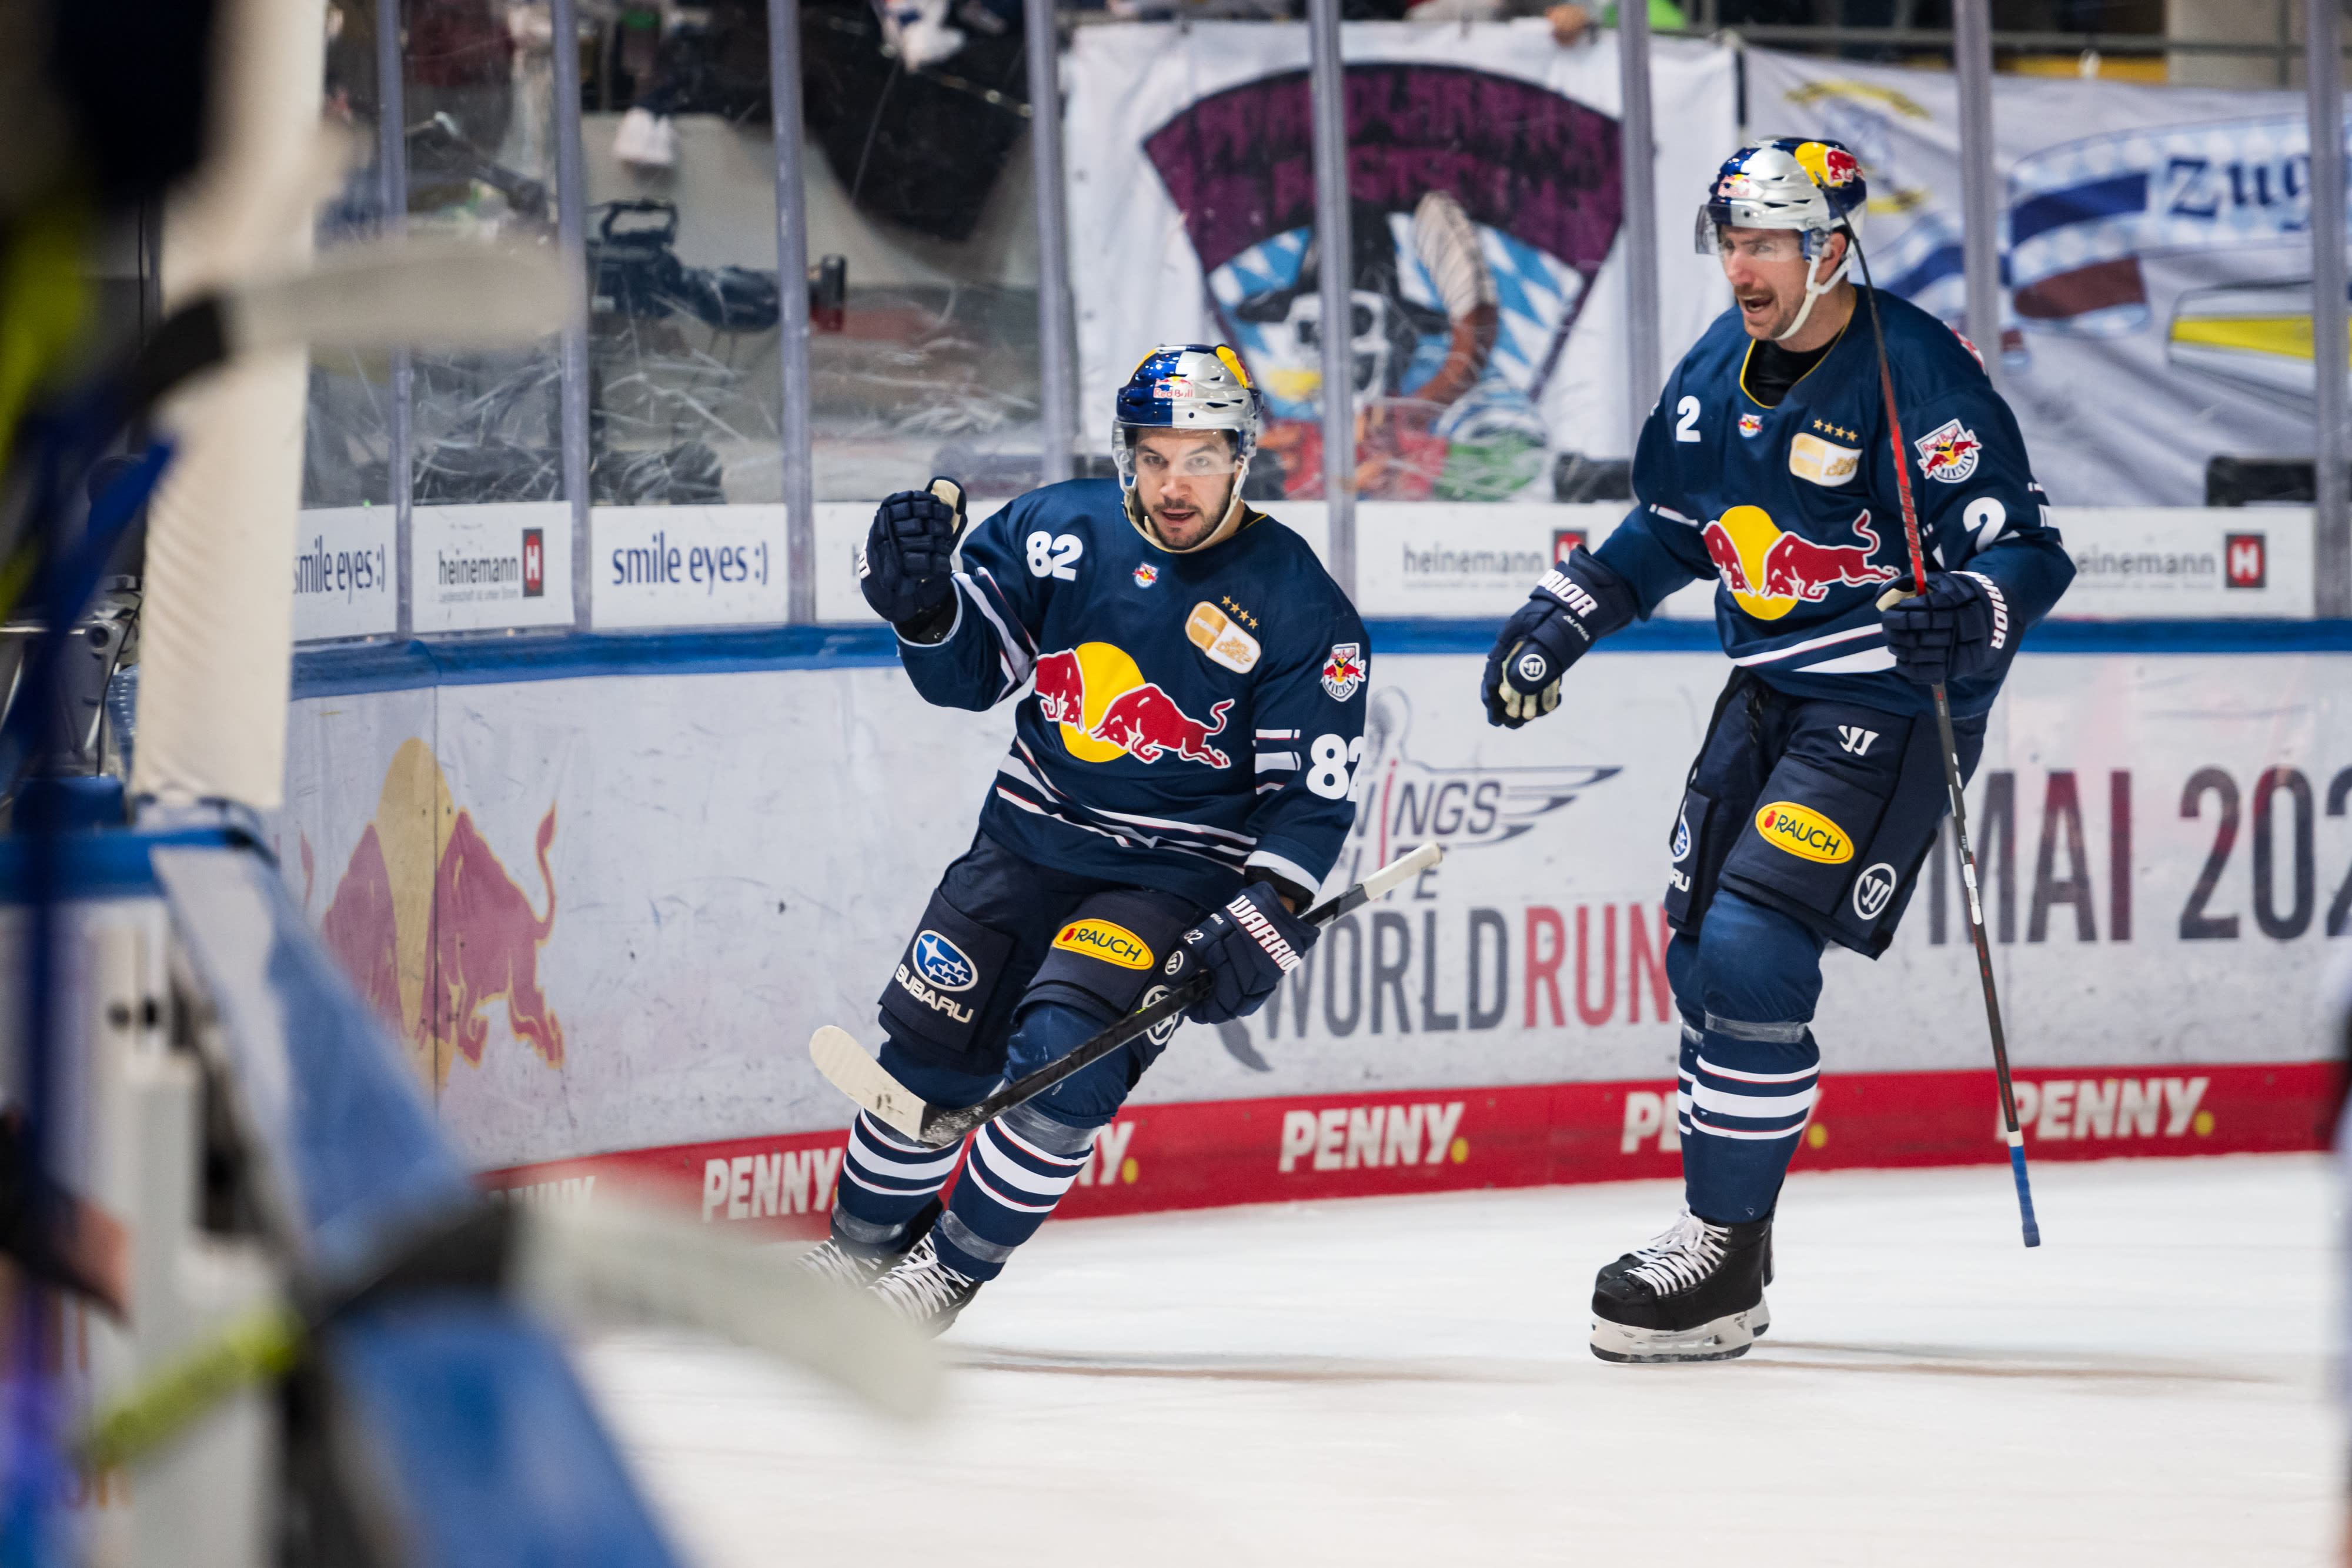 The Eisbaeren Bremerhaven Will Always Be A Positive Experience For